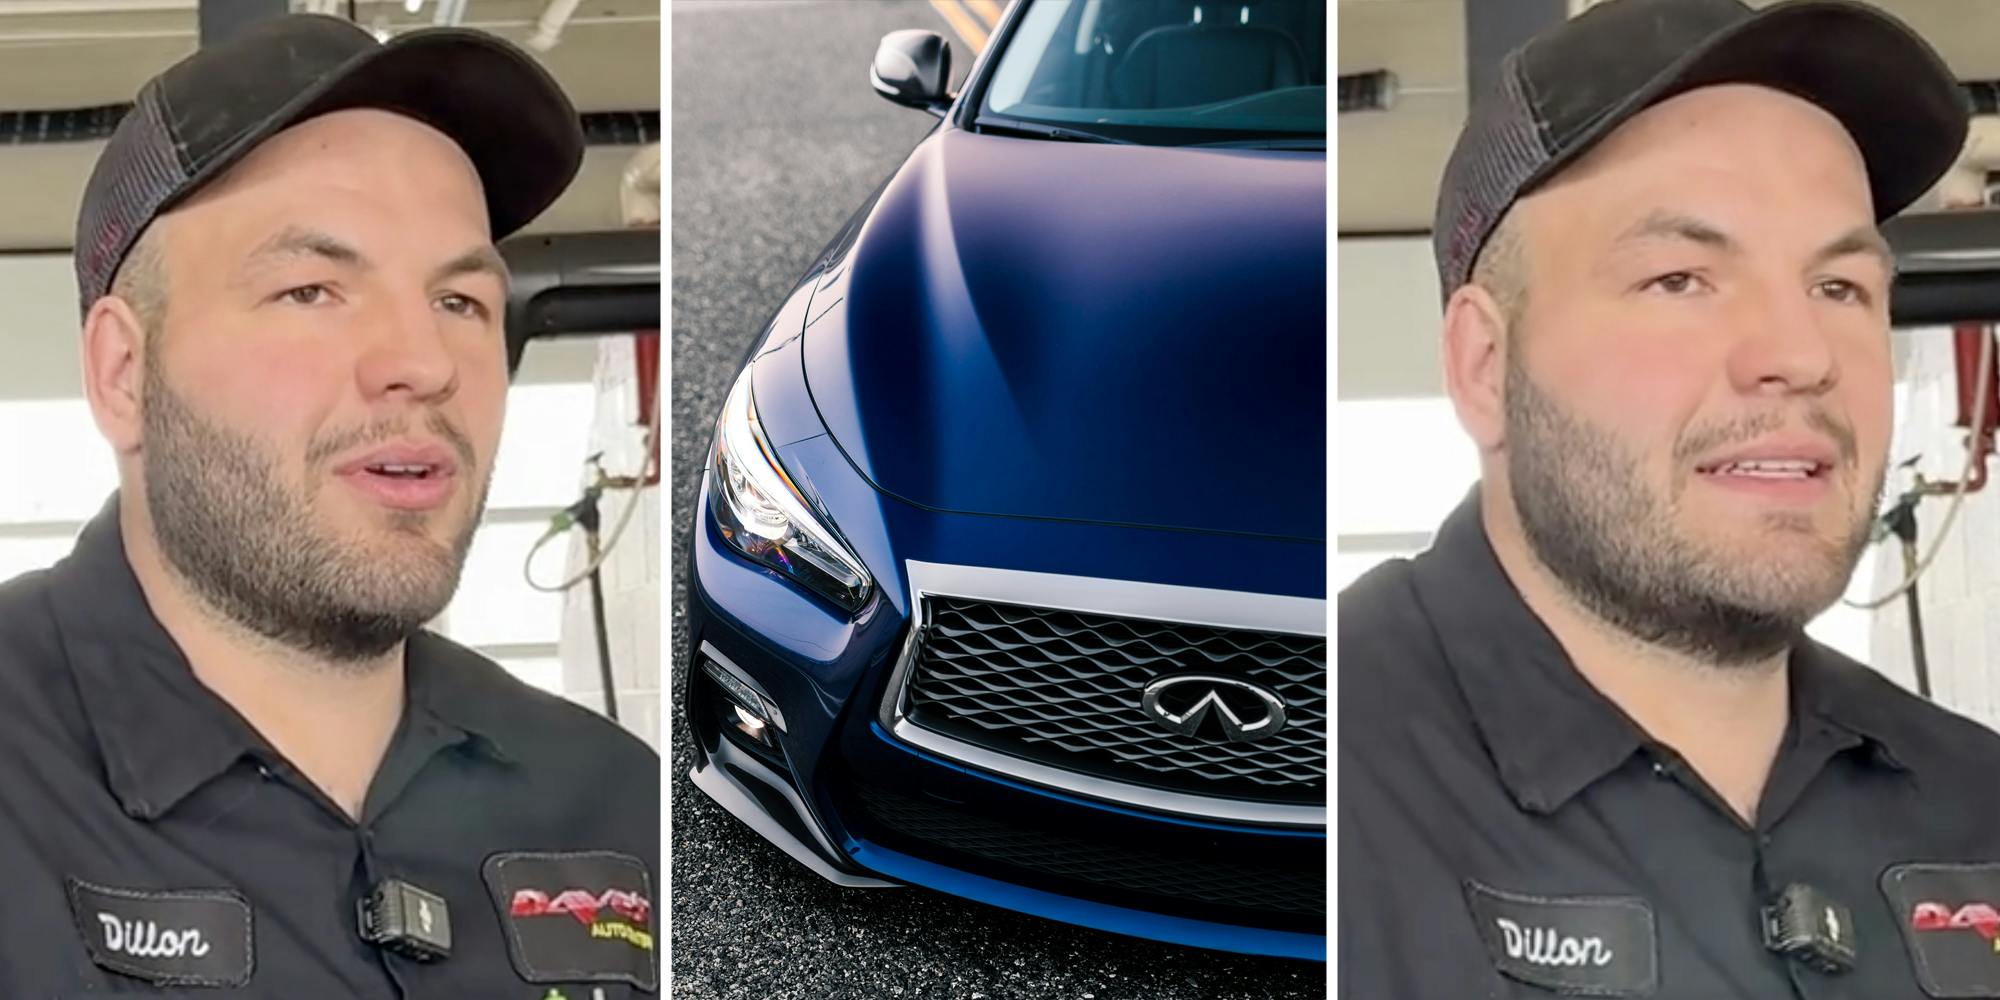 ‘How should we proceed?’: 2019 Infiniti comes in with engine noise. Here’s how a good mechanic diagnoses the client’s car